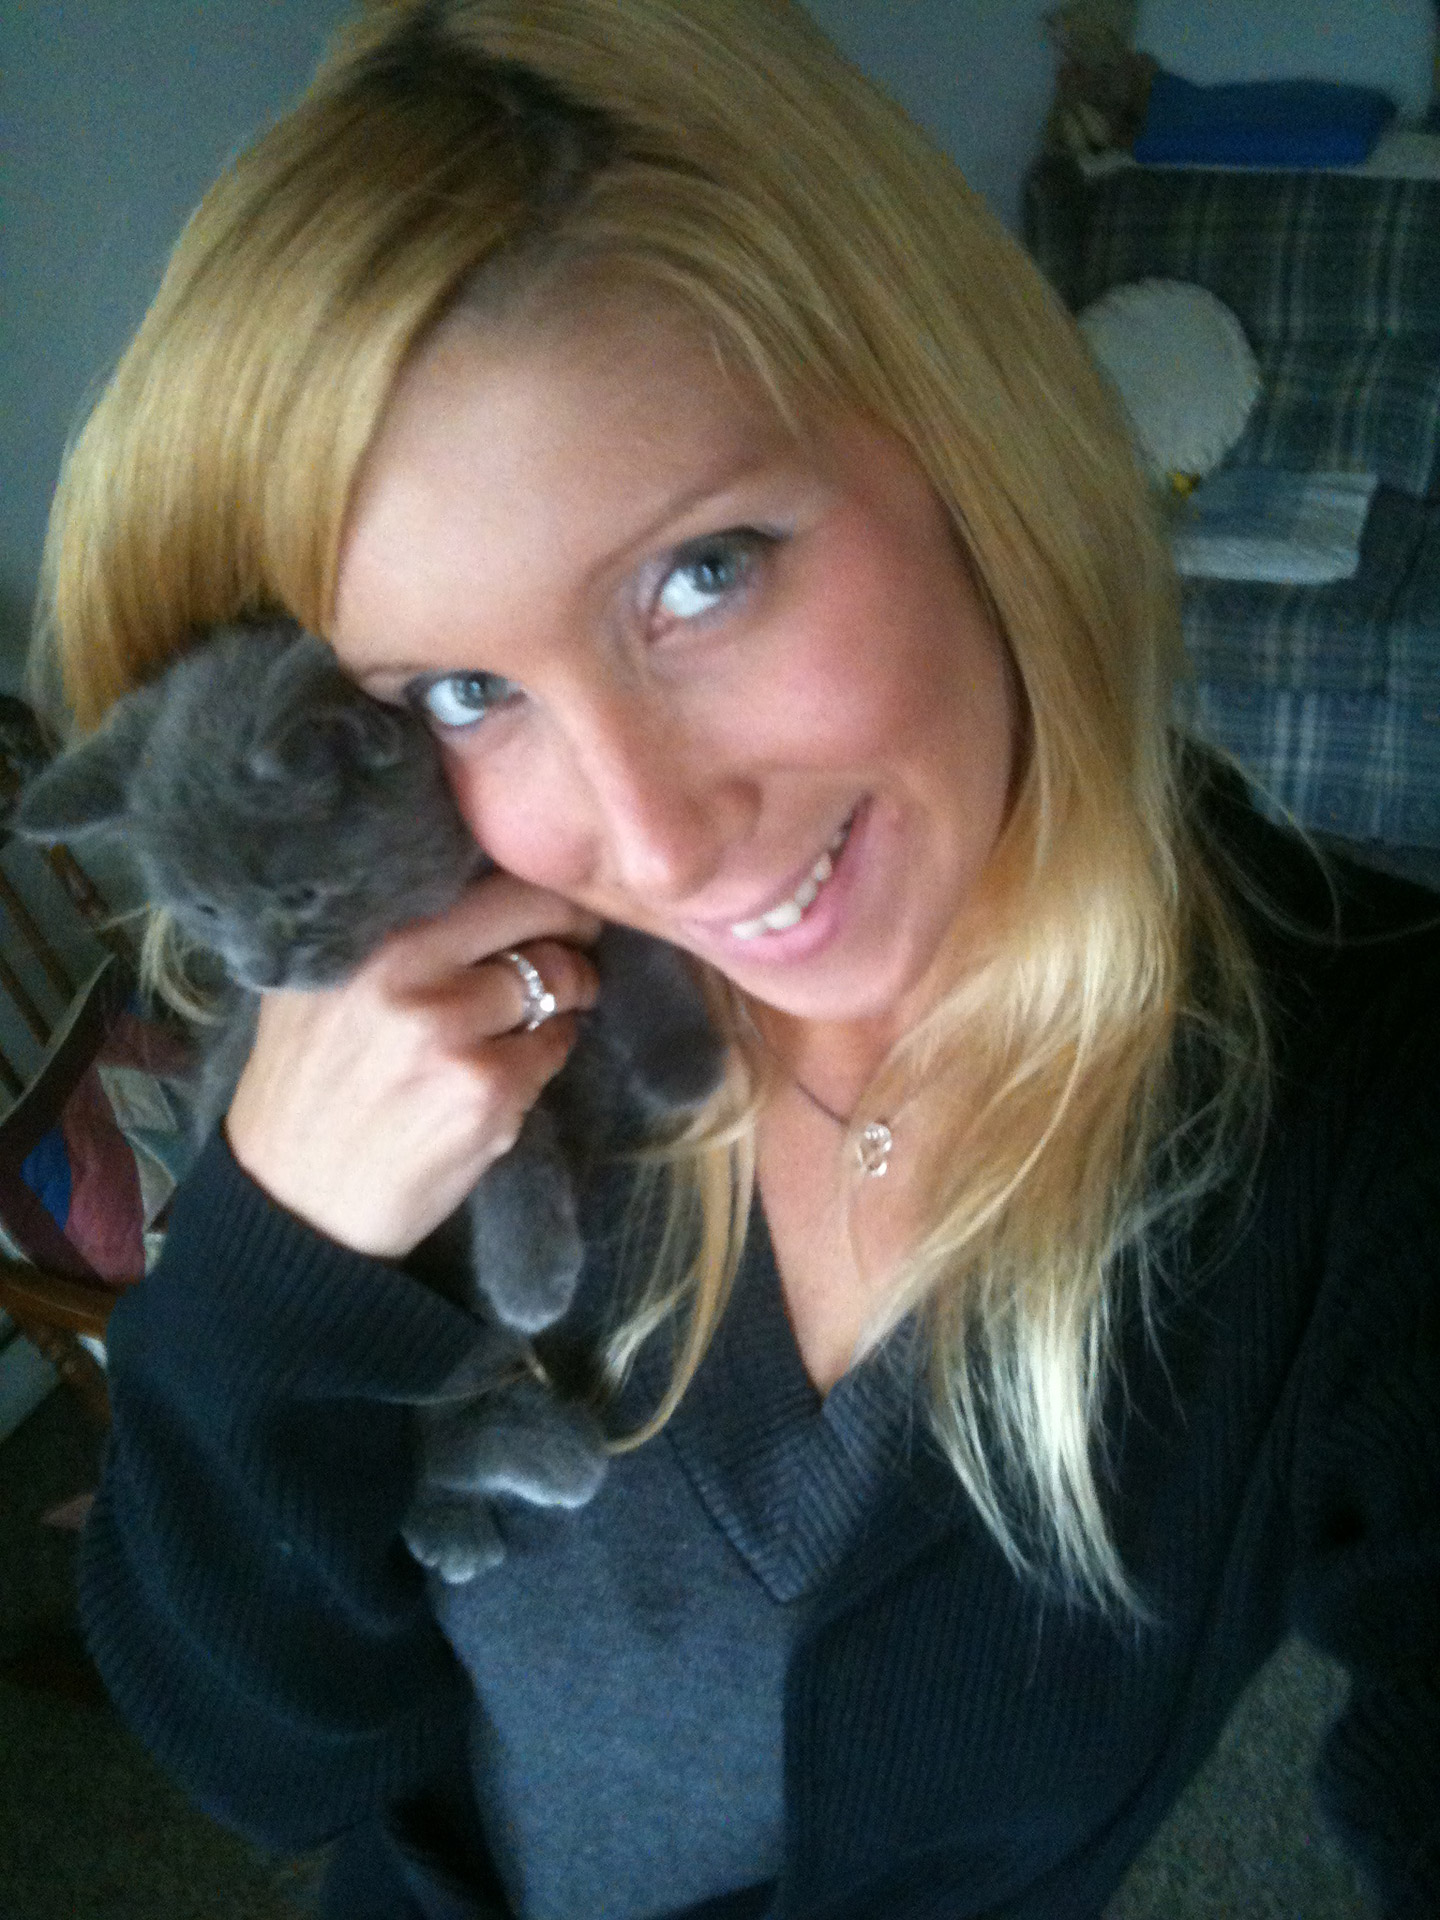 Me And A Kitten.